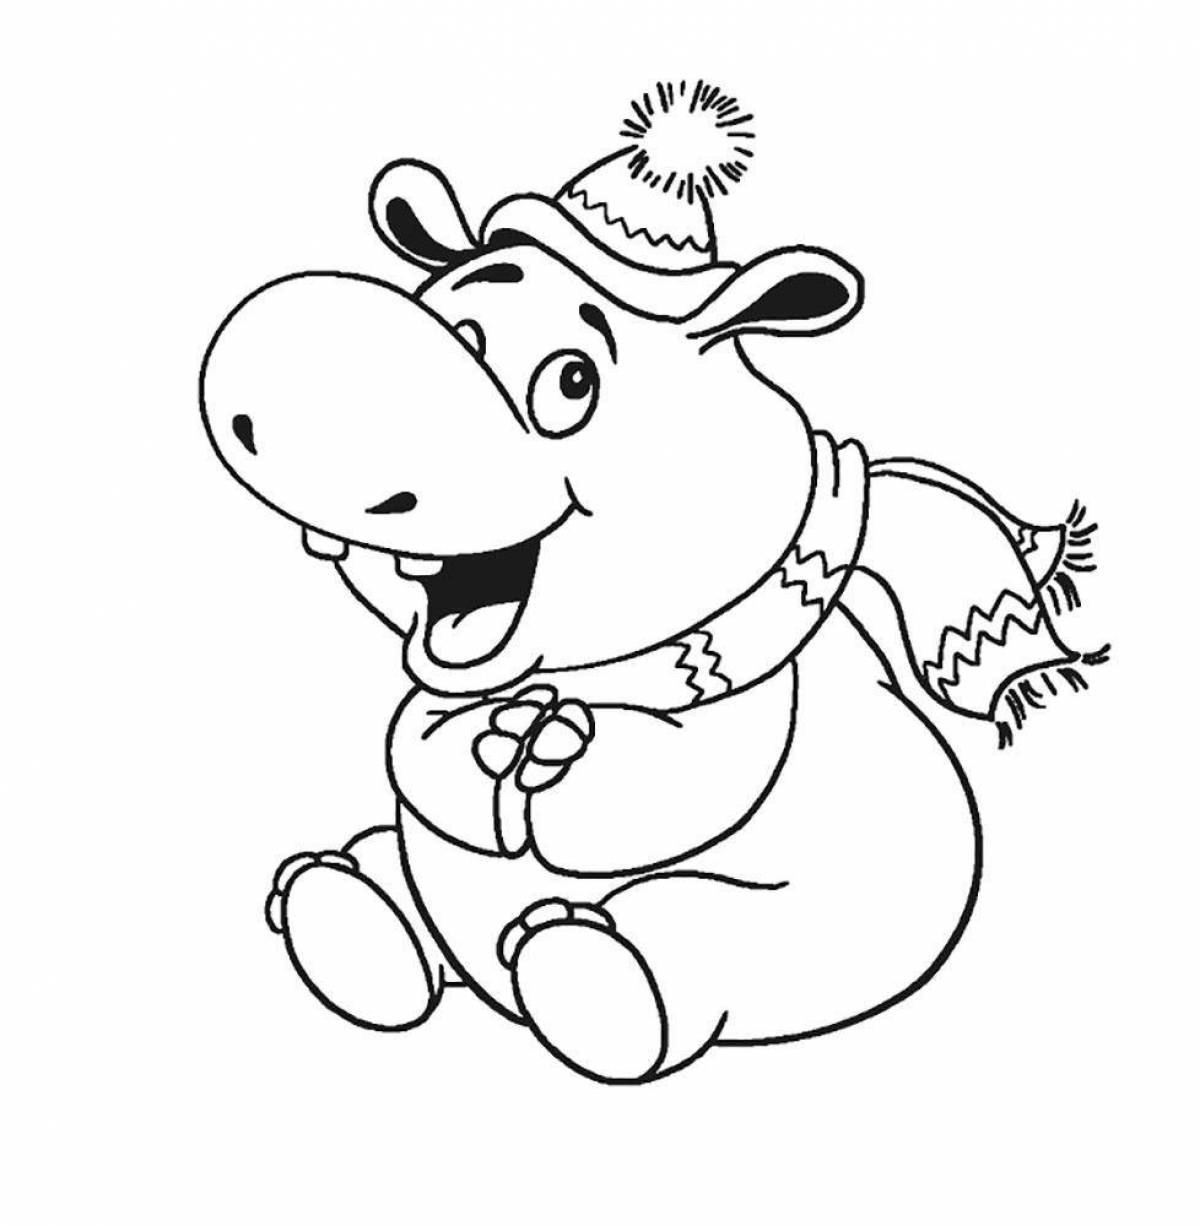 Animated hippo coloring page